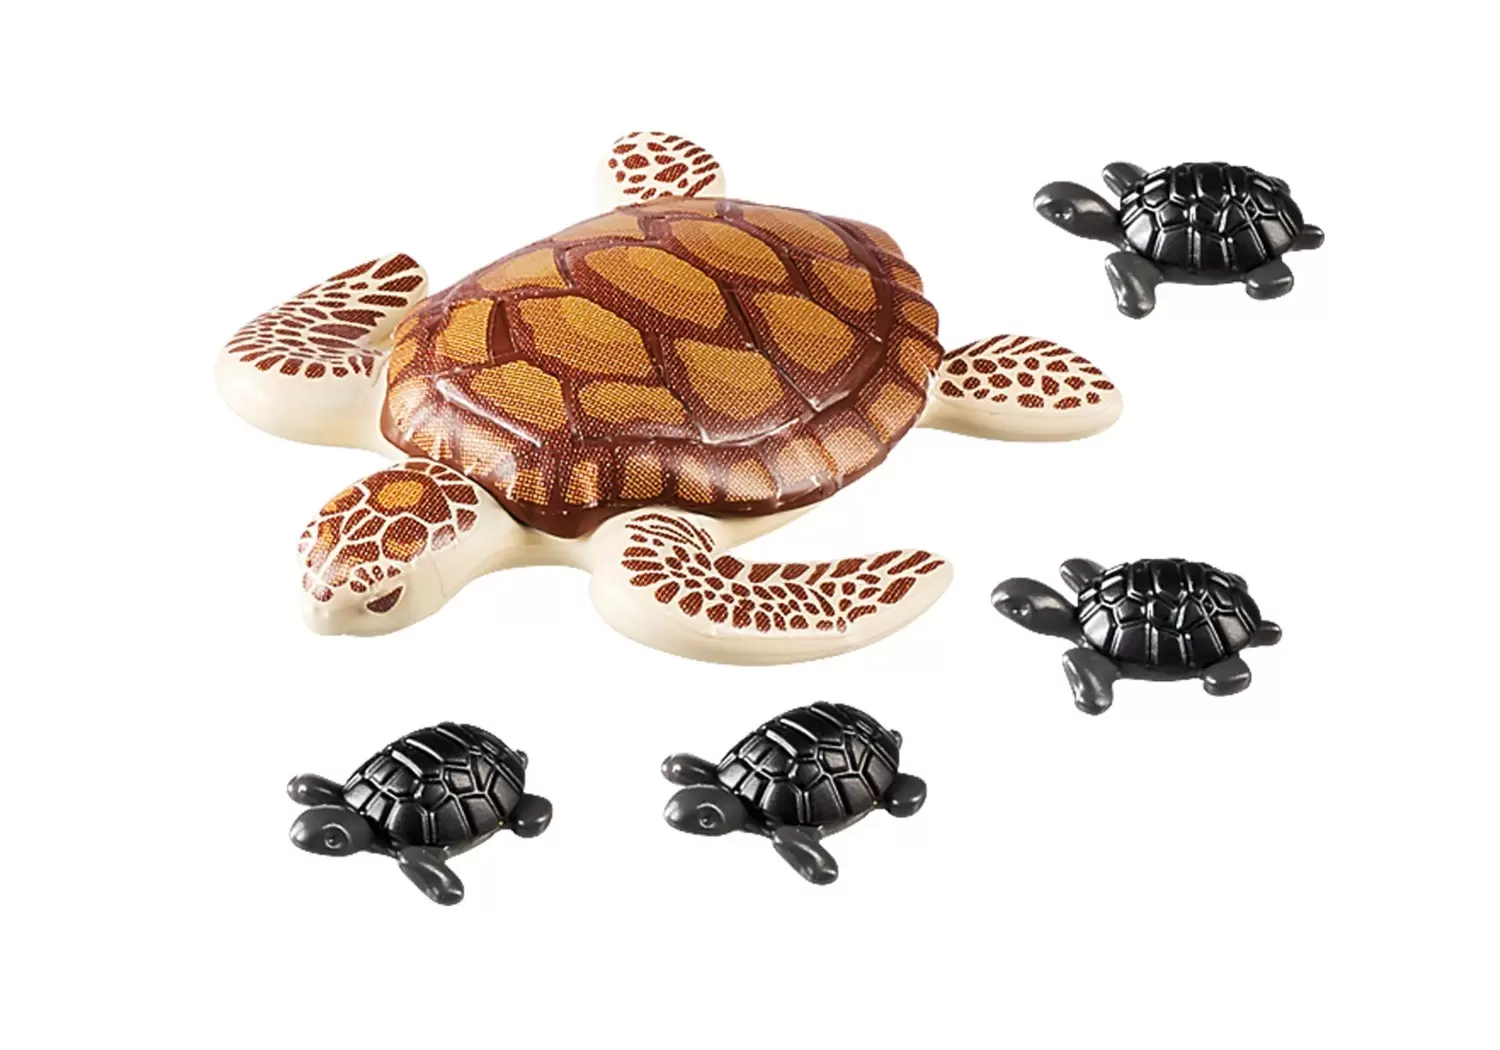 Plamobil Animal Sets - Water turtle with baby